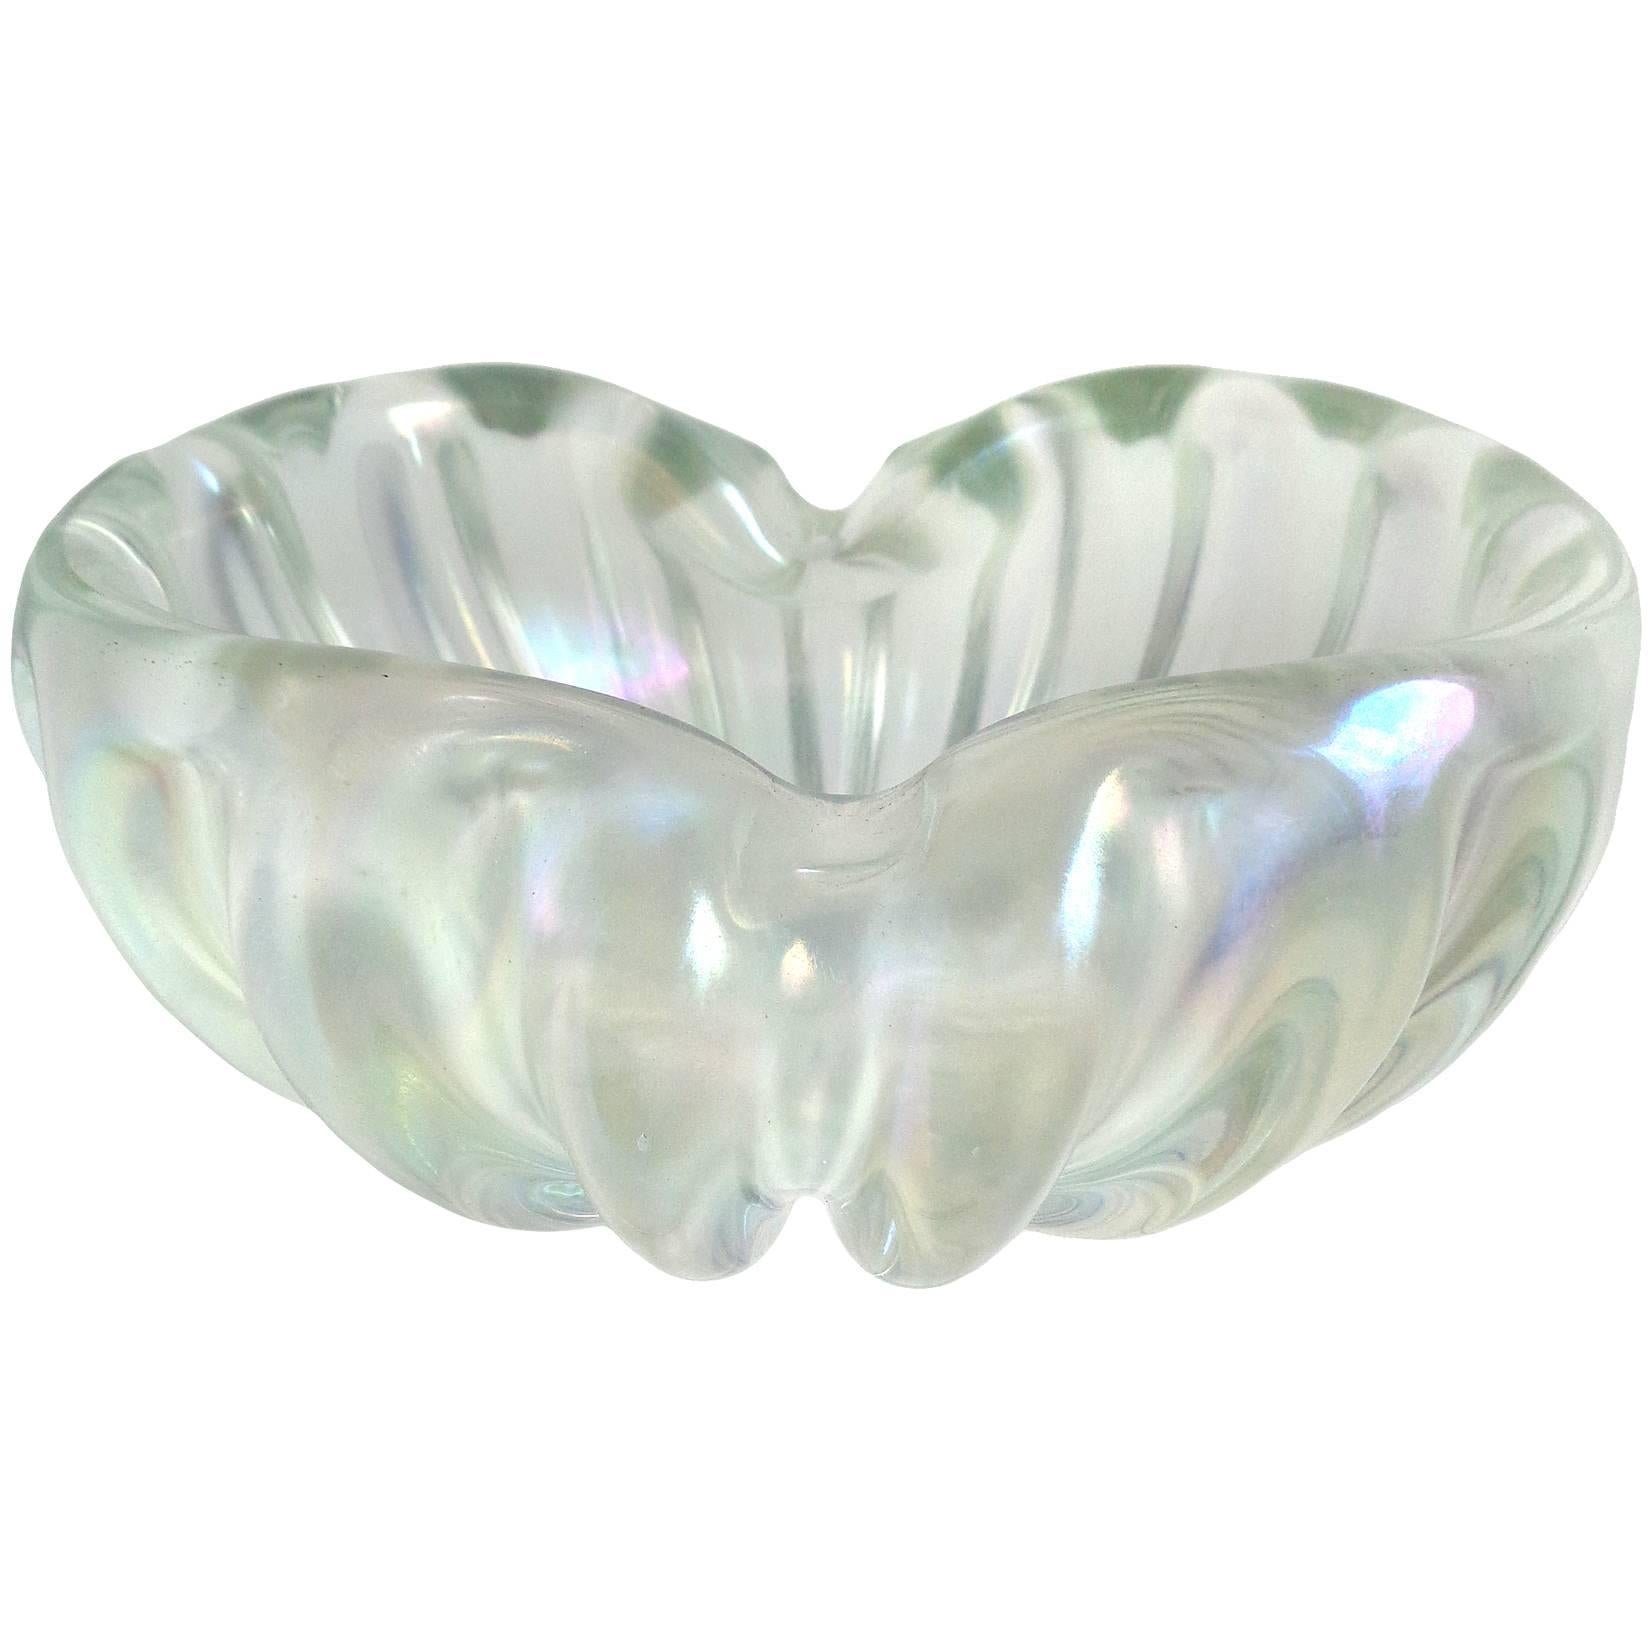 Mid-Century Modern Barovier Toso Murano Clear Iridescent Italian Art Glass Chunky Ribbed Bowl For Sale